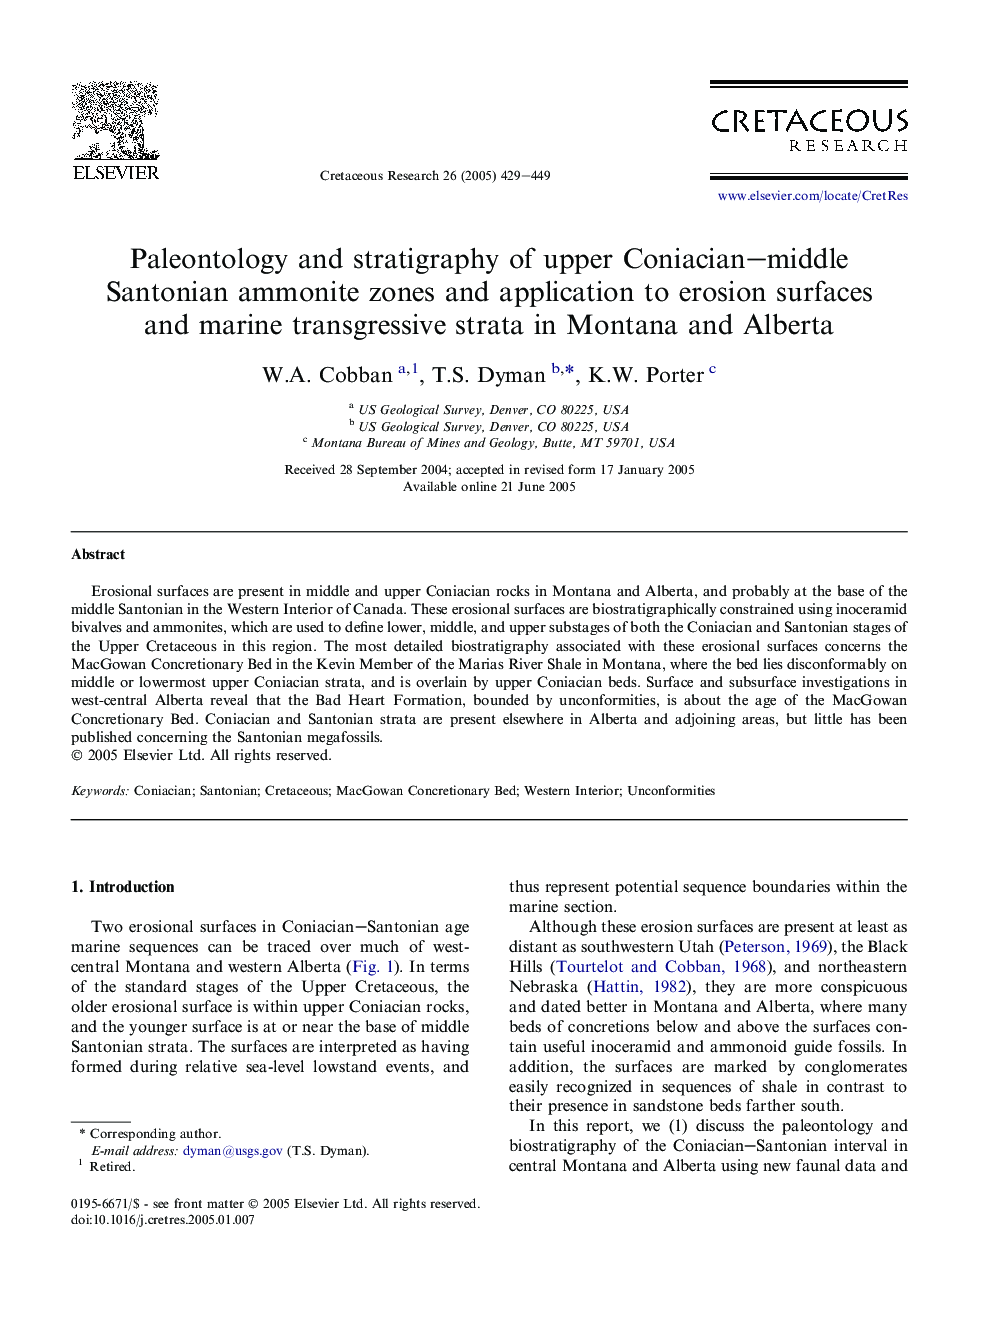 Paleontology and stratigraphy of upper Coniacian-middle Santonian ammonite zones and application to erosion surfaces and marine transgressive strata in Montana and Alberta